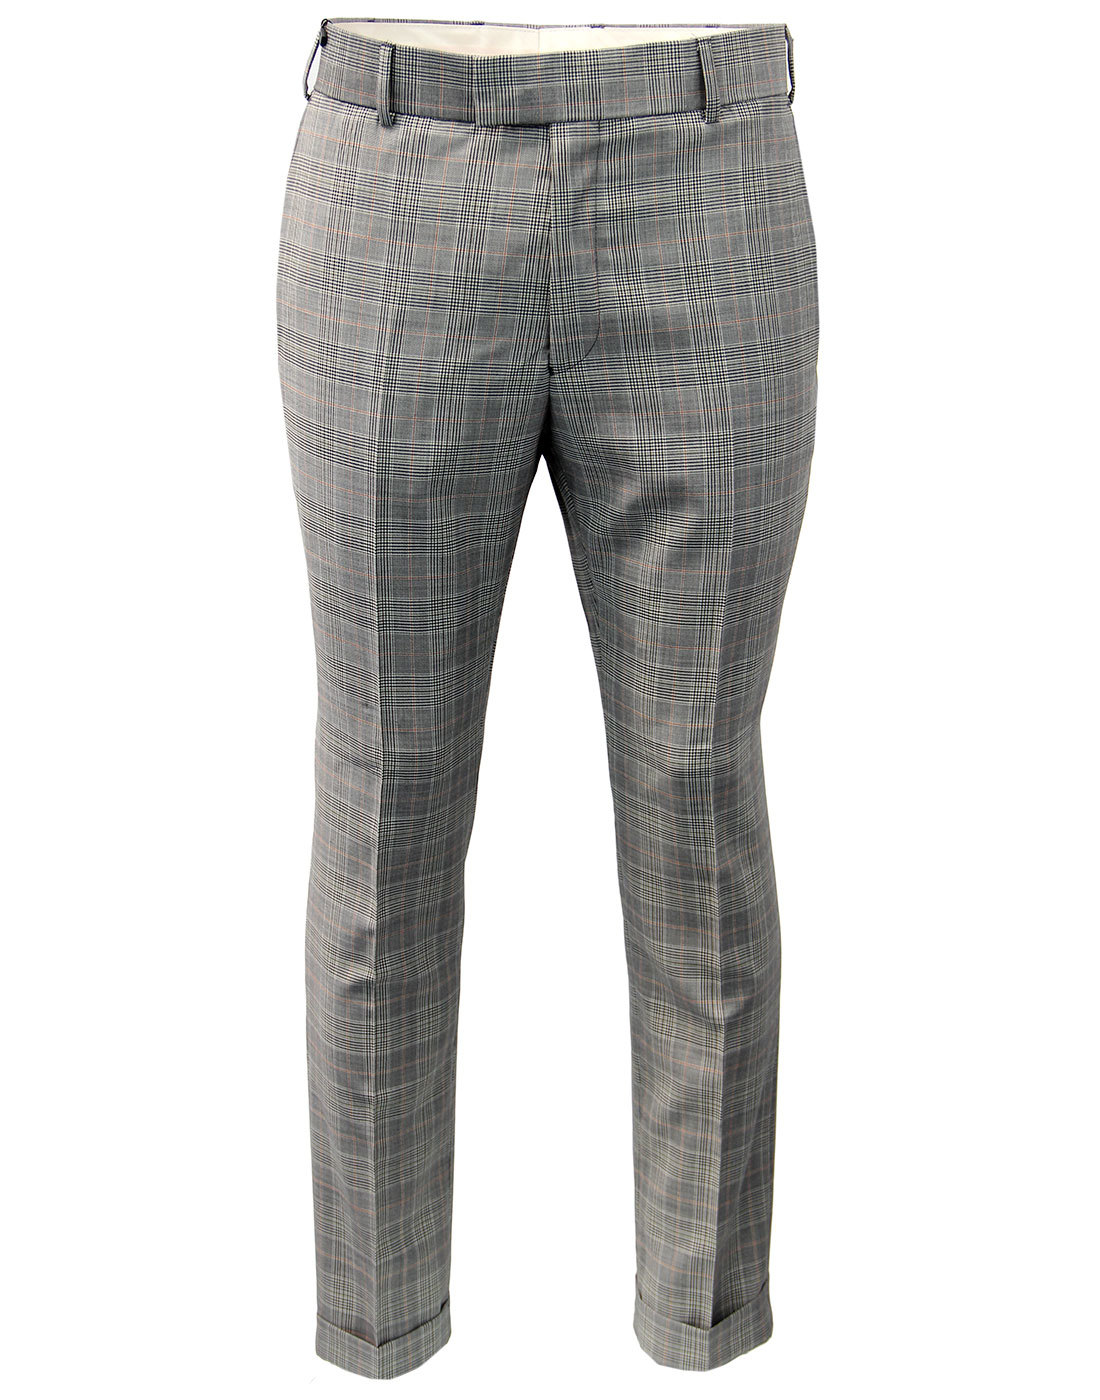 GIBSON LONDON 60s Mod Dogtooth POW Check Trousers